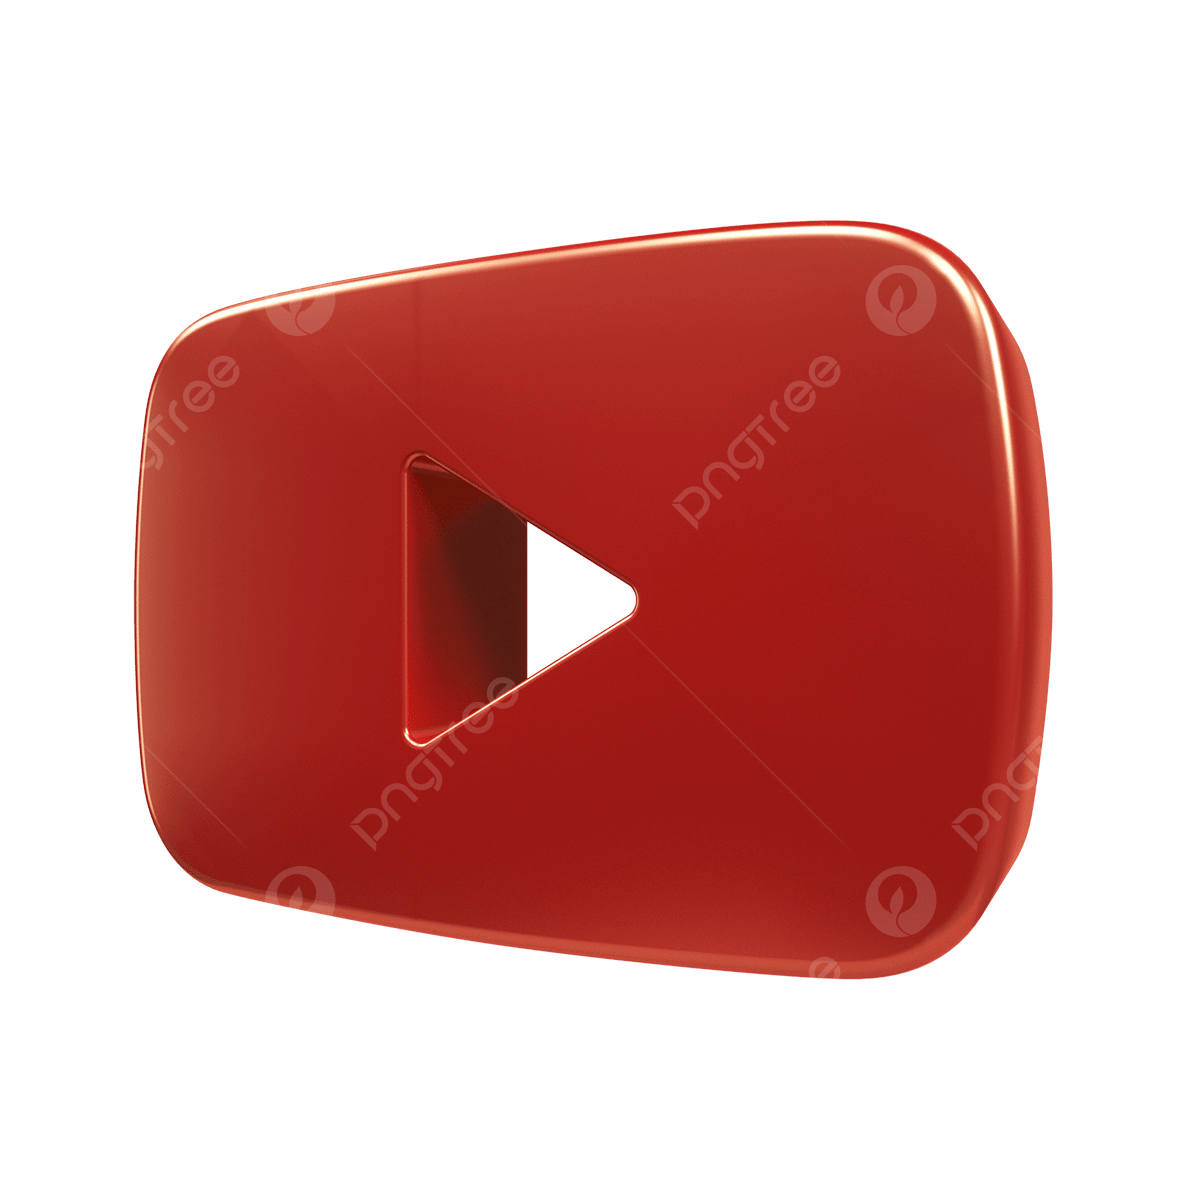 YouTube Play Button PNG Image File